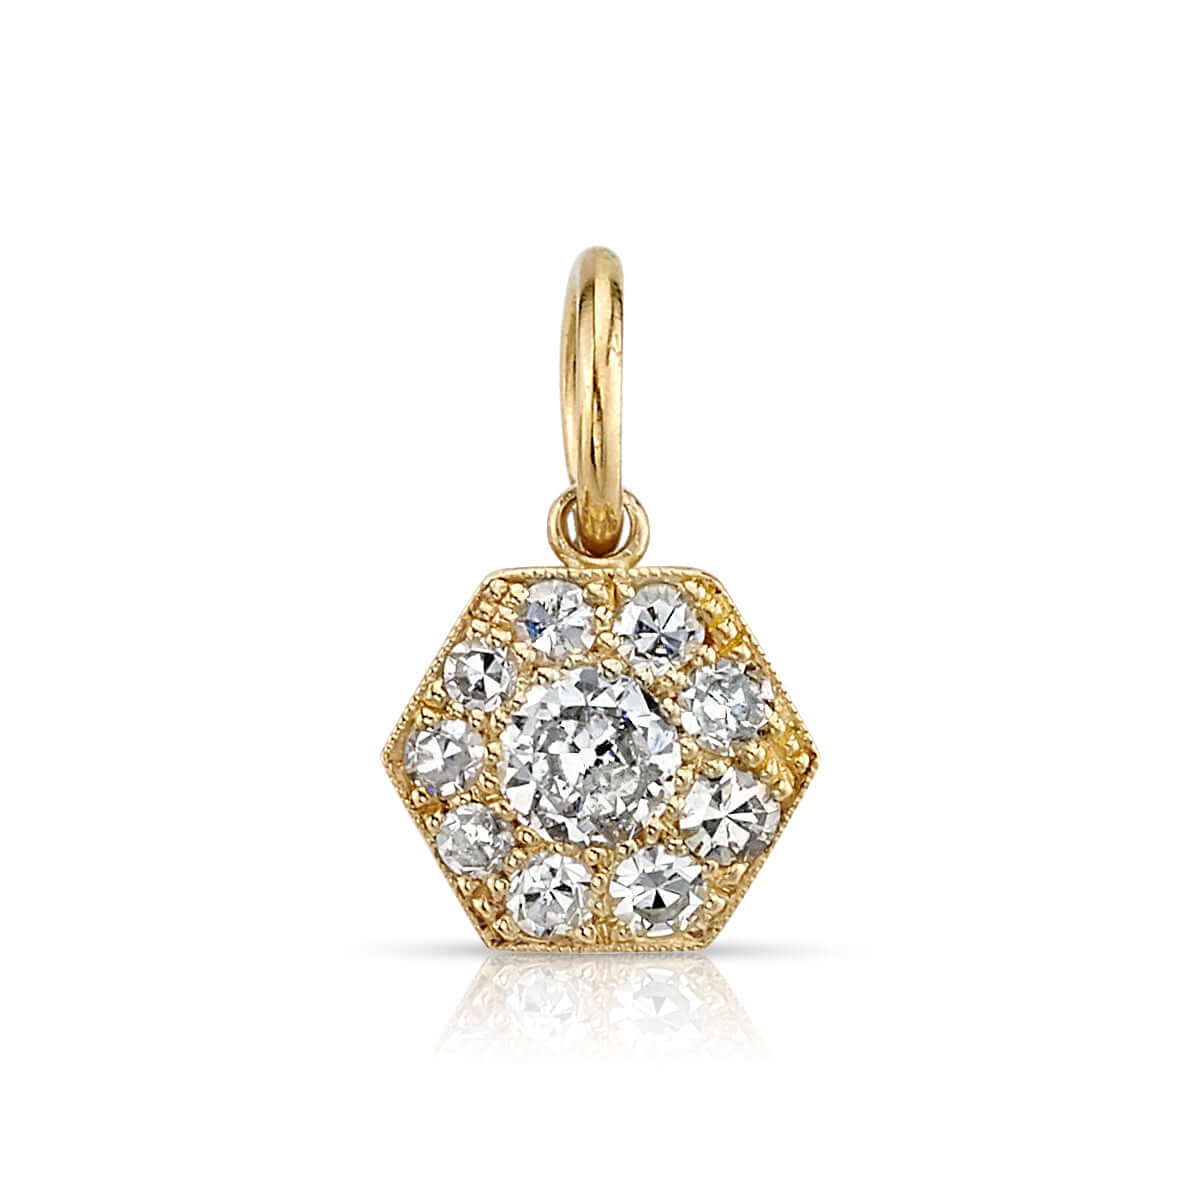 SINGLE STONE MINI HEXAGONAL COBBLESTONE CHARM PENDANT featuring Approximately 0.25ctw varying old cut and round brilliant cut diamonds set in a handcrafted 18K yellow gold pendant. Prices vary according to diamond weight. Price does not include chain. Cha